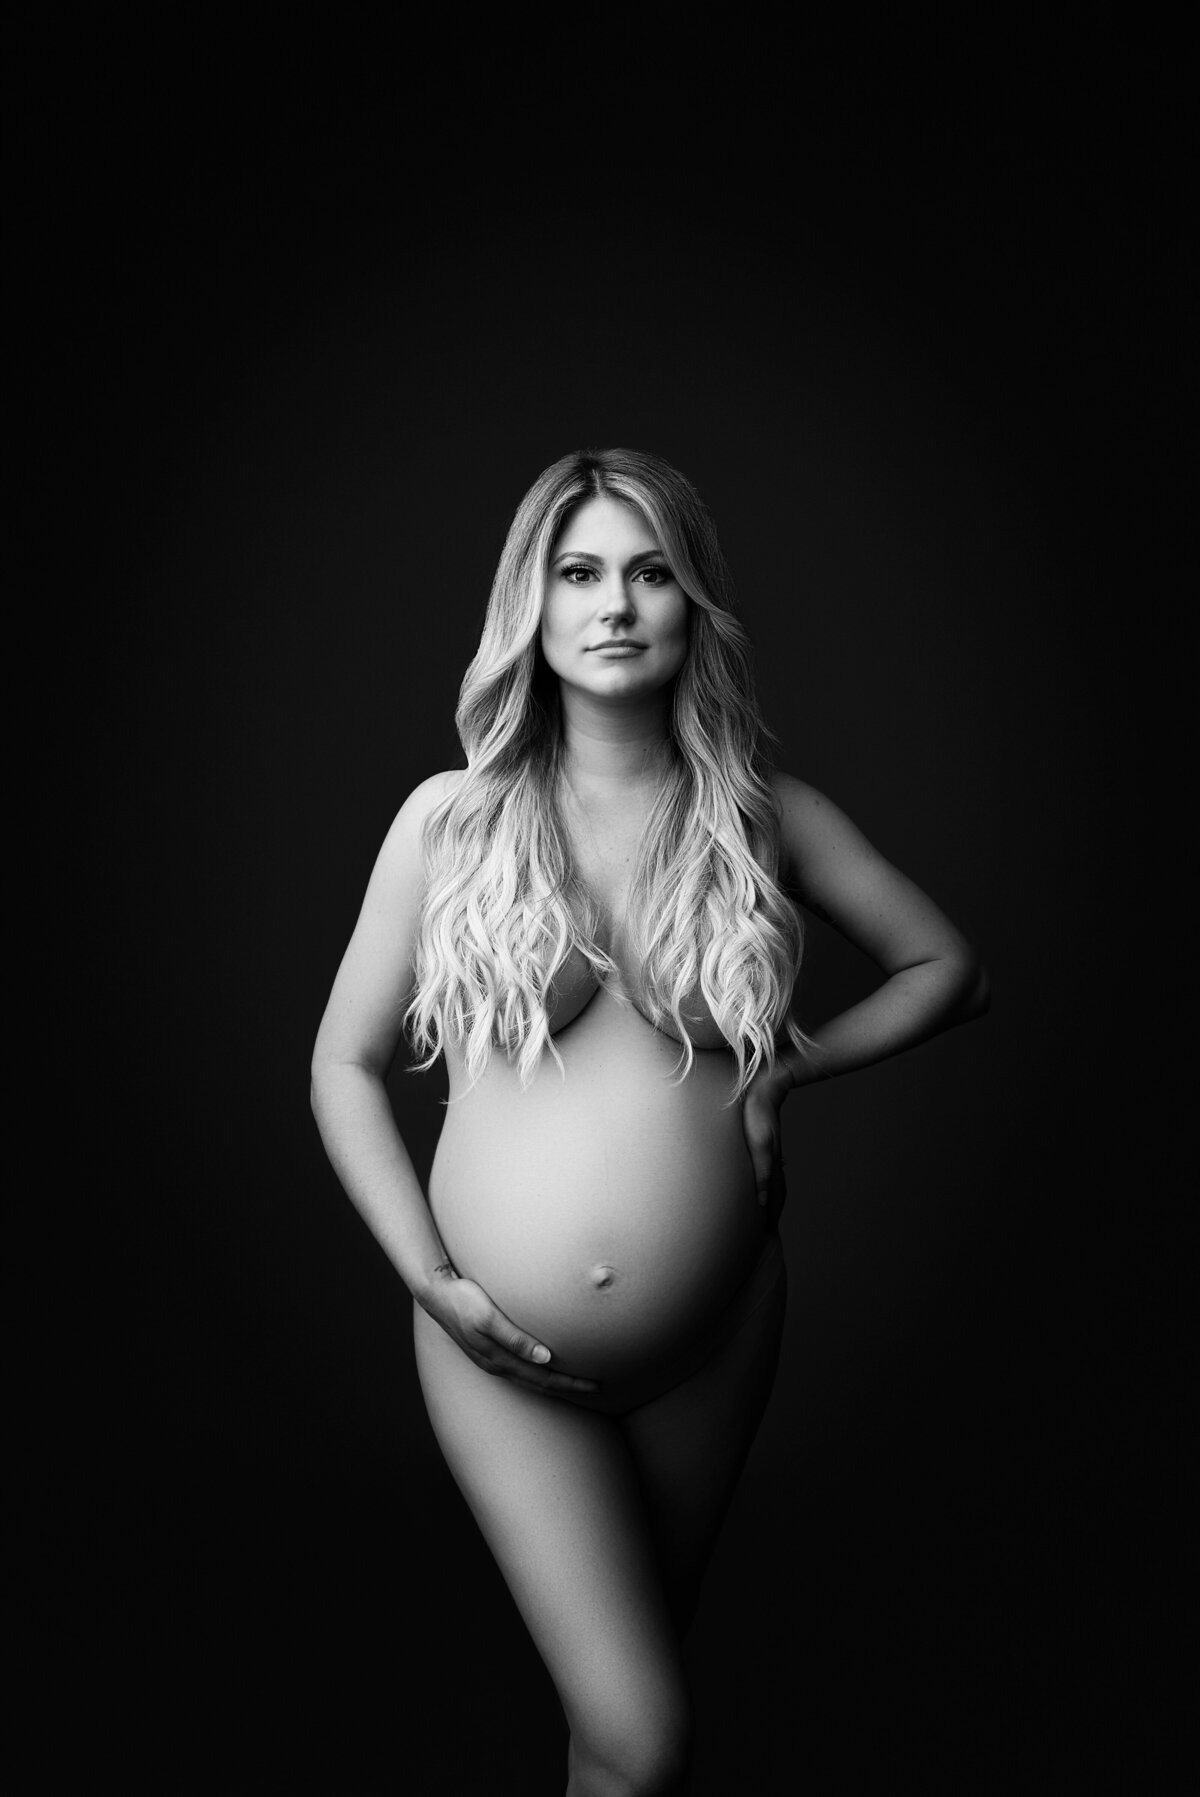 New Jersey's best maternity photographer Katie Marshall captures expectant mom for fine art maternity photos. Mom is standing facing the camera bare. Her long blonde wavy hair is pushed to the front to hide her breasts and her front knee extended to hide her intimate parts. One hand is resting underneath her bump, the other on the small of her back. The left half of her body is enveloped in light, the right half shadowed to create interest and dimension.